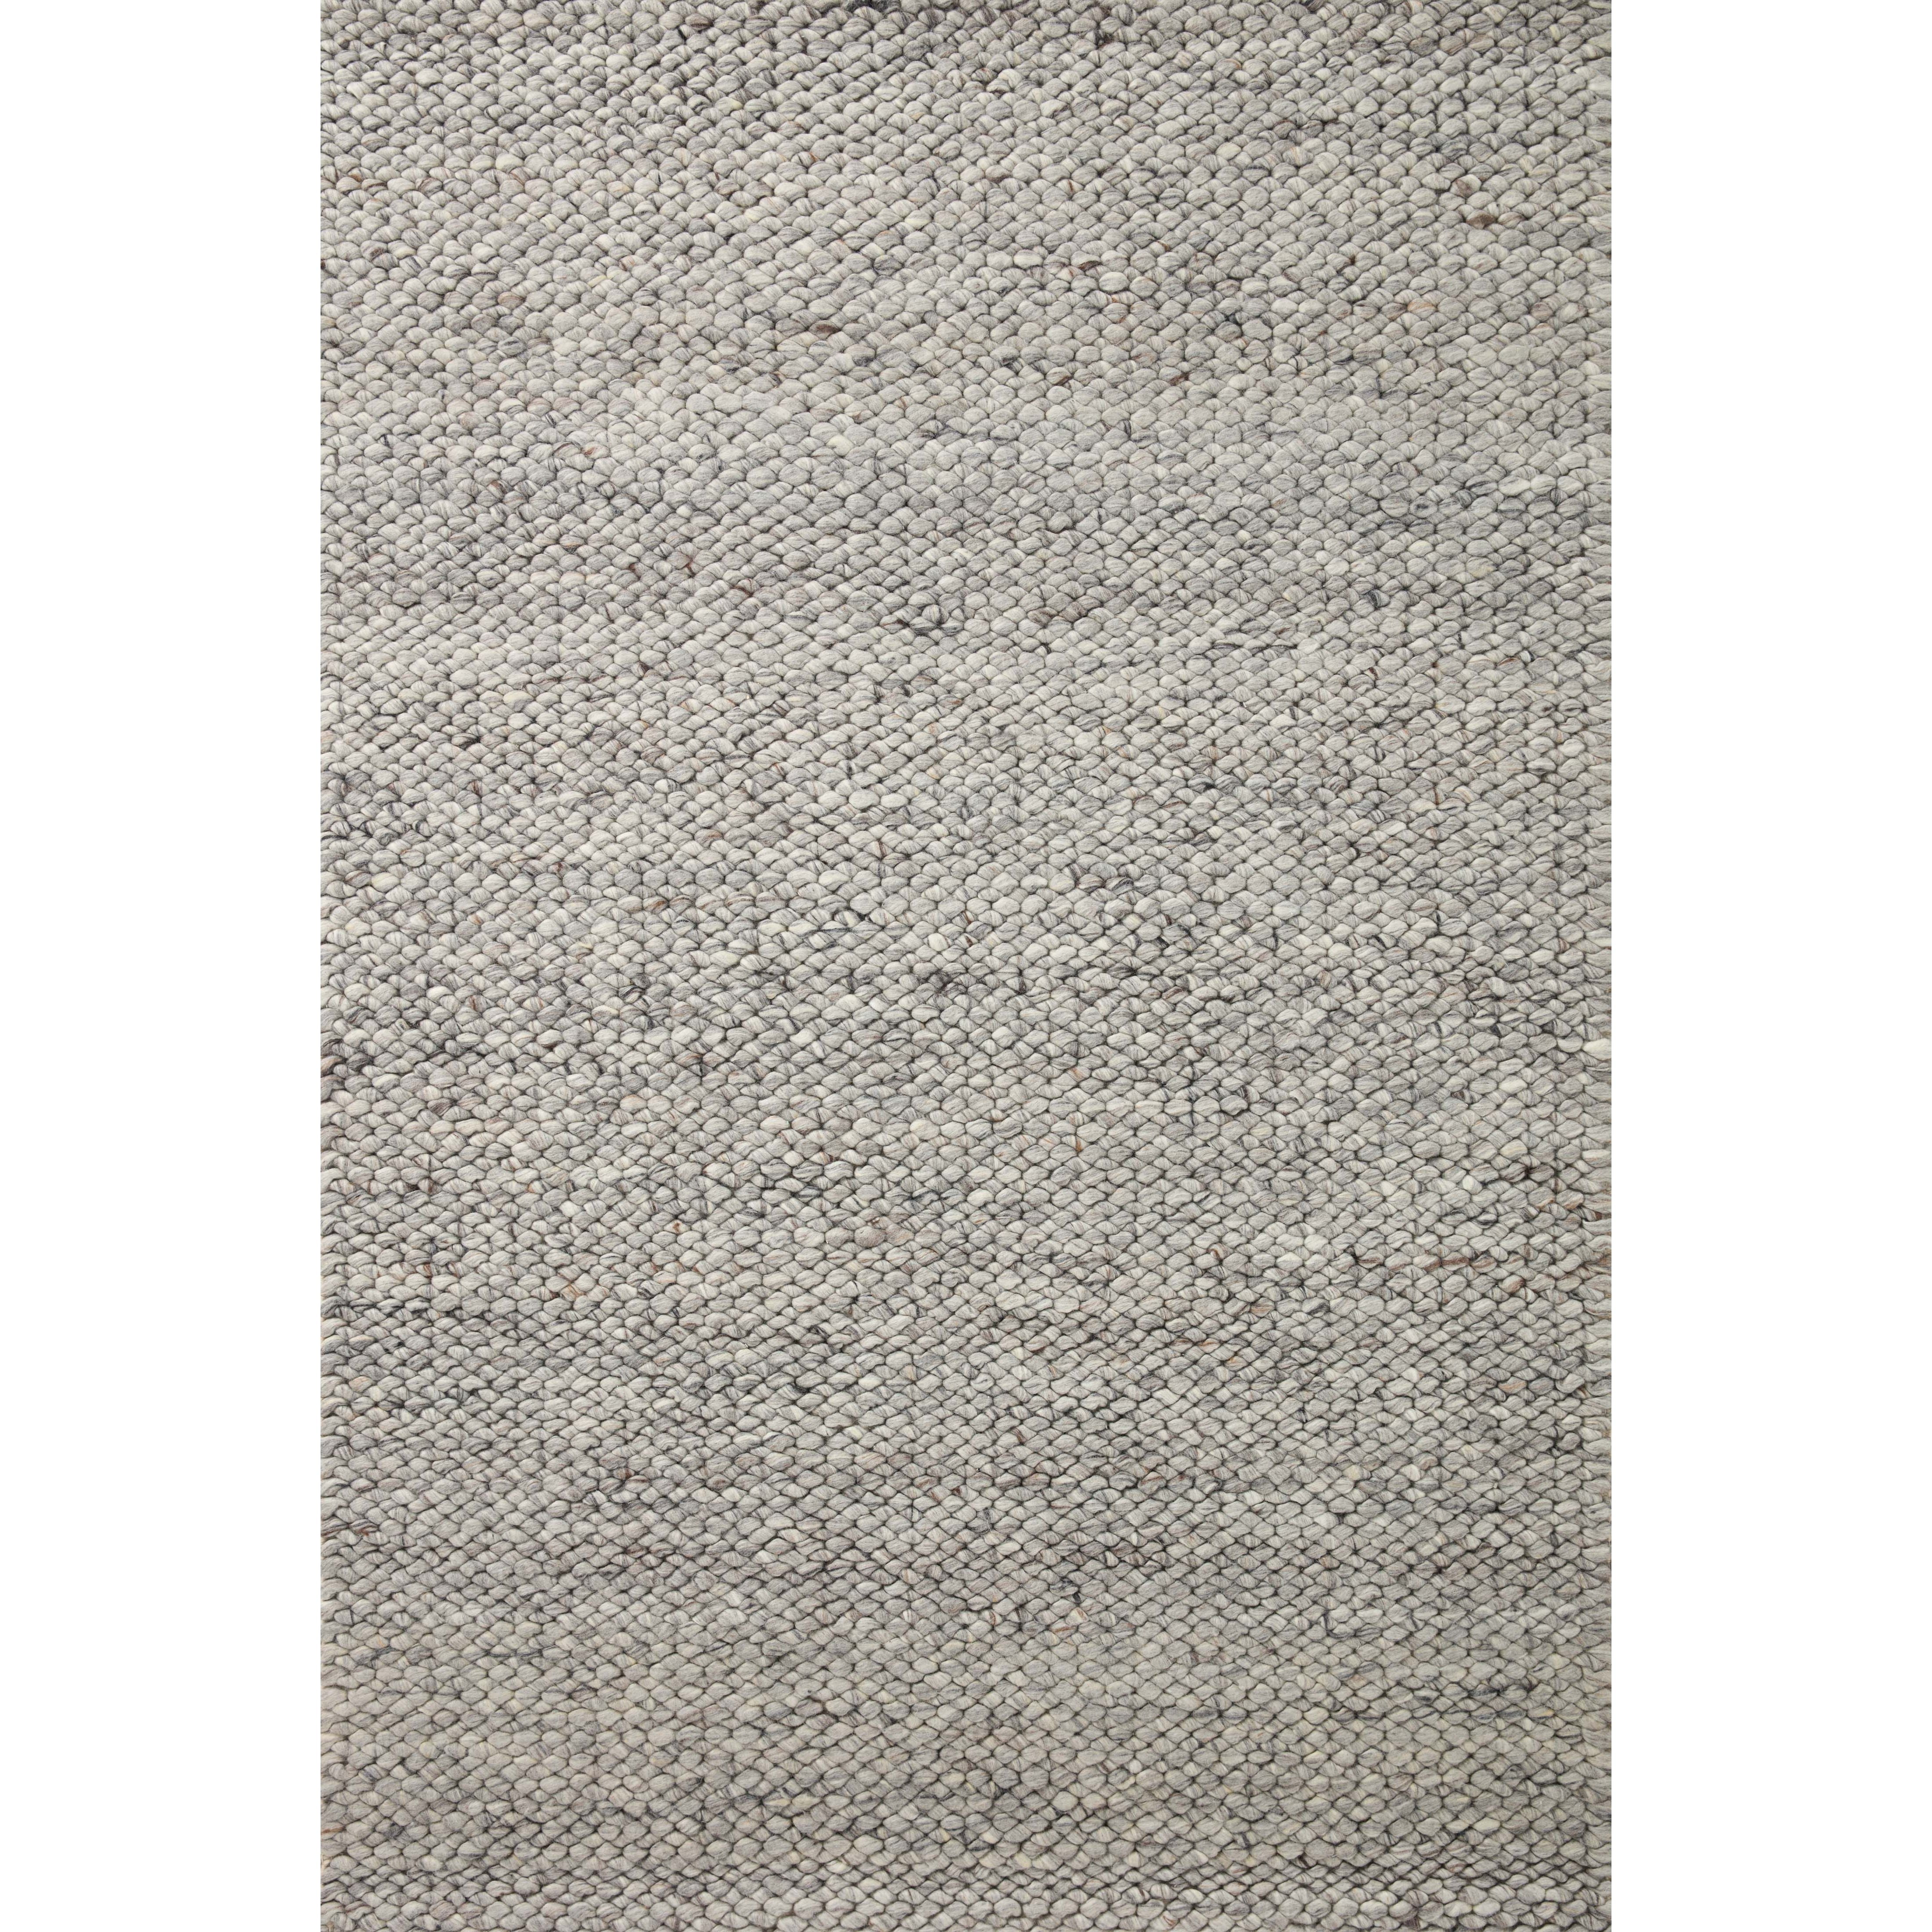 The Hendrick Grey Rug is a beautifully textured wool area rug with an elevated ease reminiscent of a cozy handmade sweater. The rug is very plush underfoot, making it equally welcome in bedrooms and living rooms. The hand-woven weave pattern adds dimension while the rug’s color palette is soft, neutral, and serene. Amethyst Home provides interior design, new construction, custom furniture, and area rugs in the Des Moines metro area.